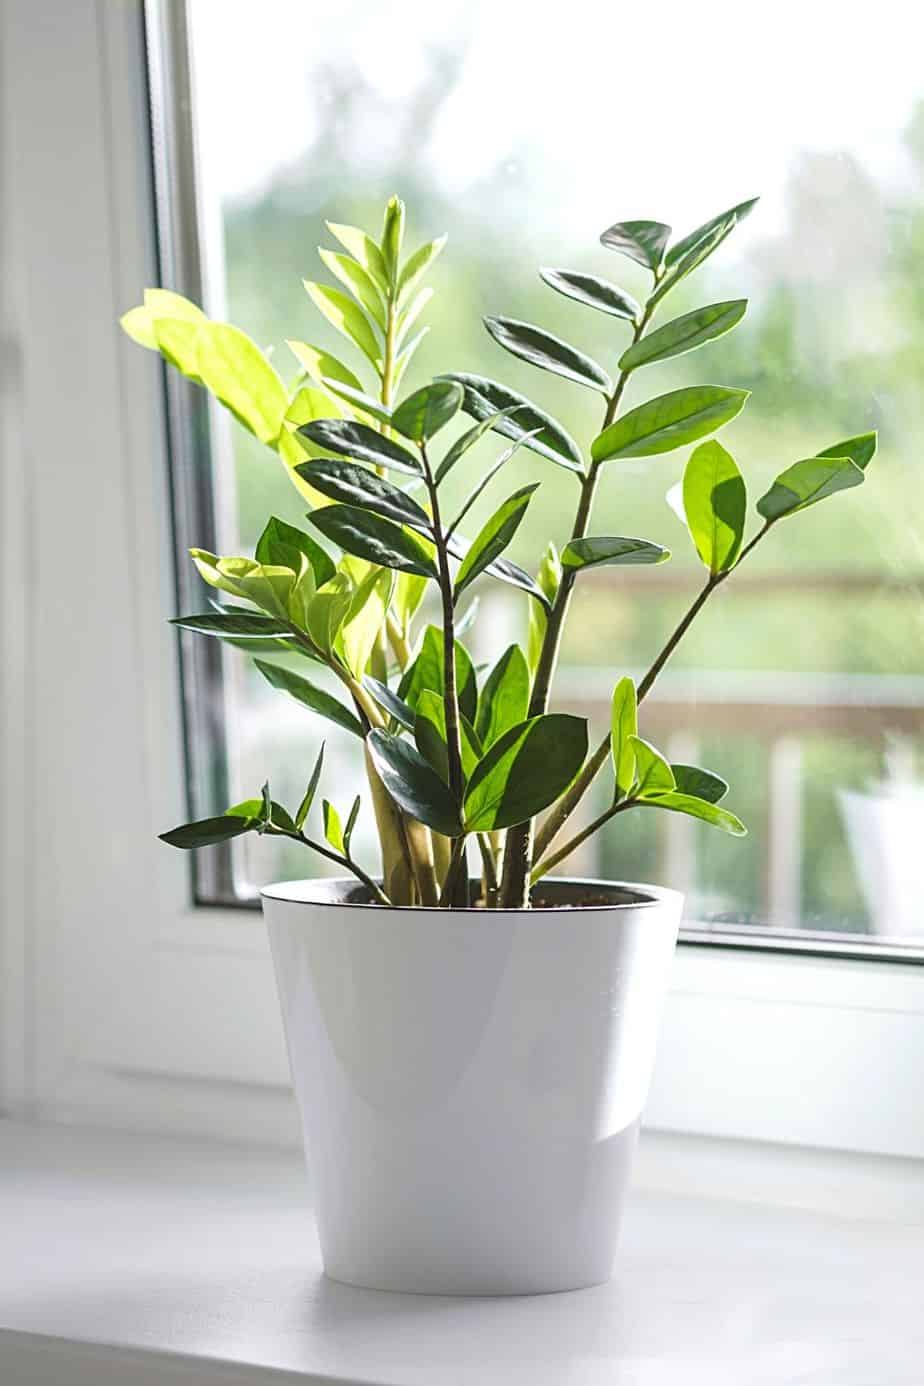 ZZ plants require bright yet indirect light for them to grow